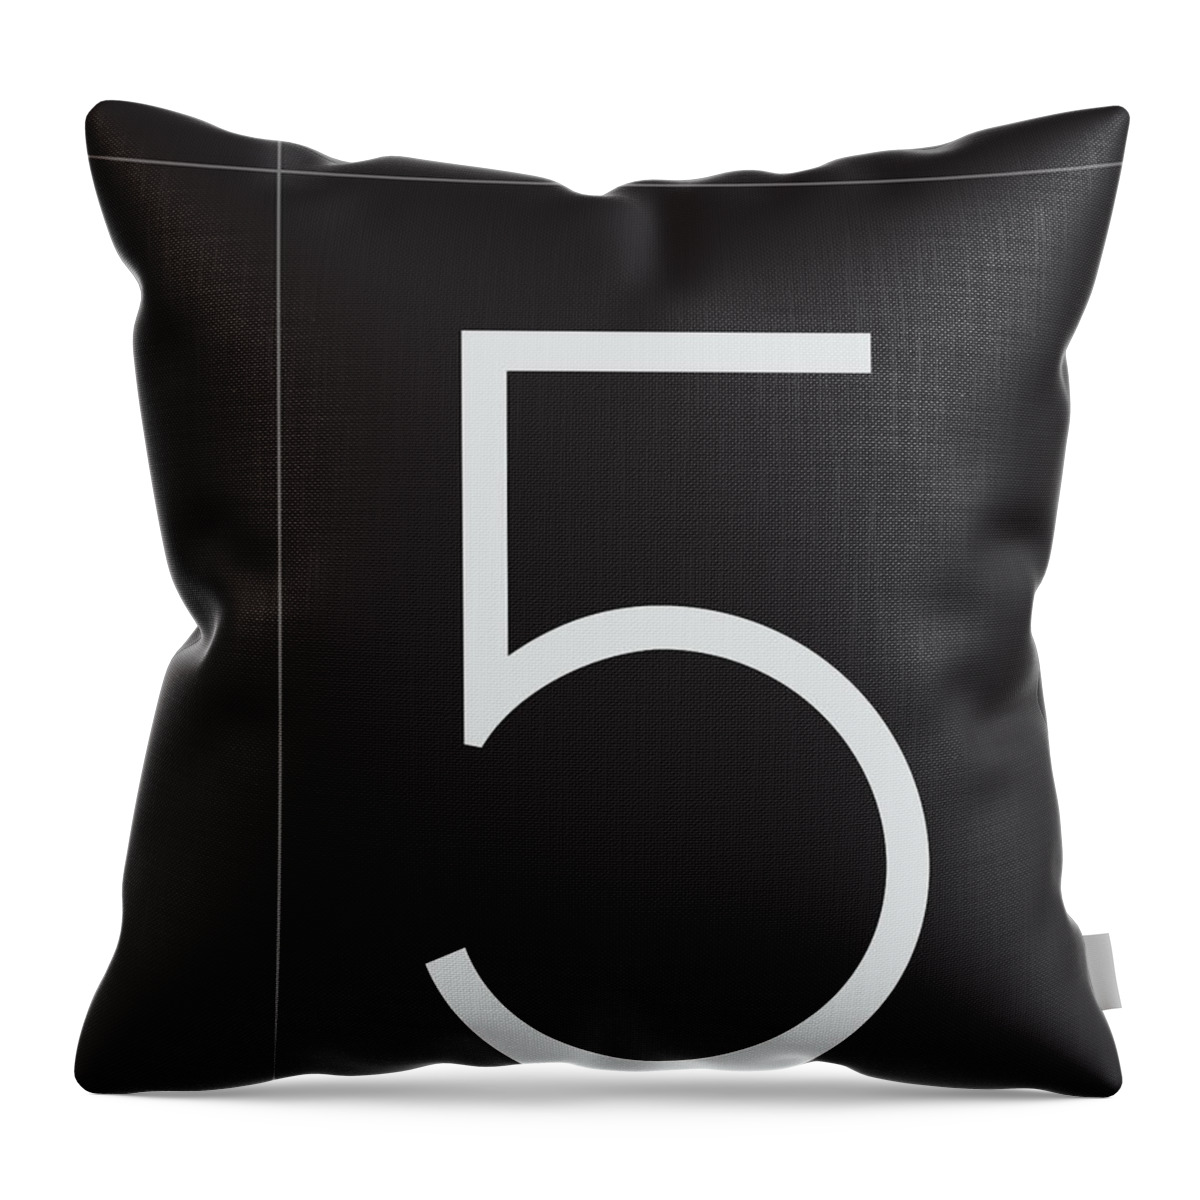 Five Throw Pillow featuring the mixed media Number Five Minimalist Print by Studio Grafiikka